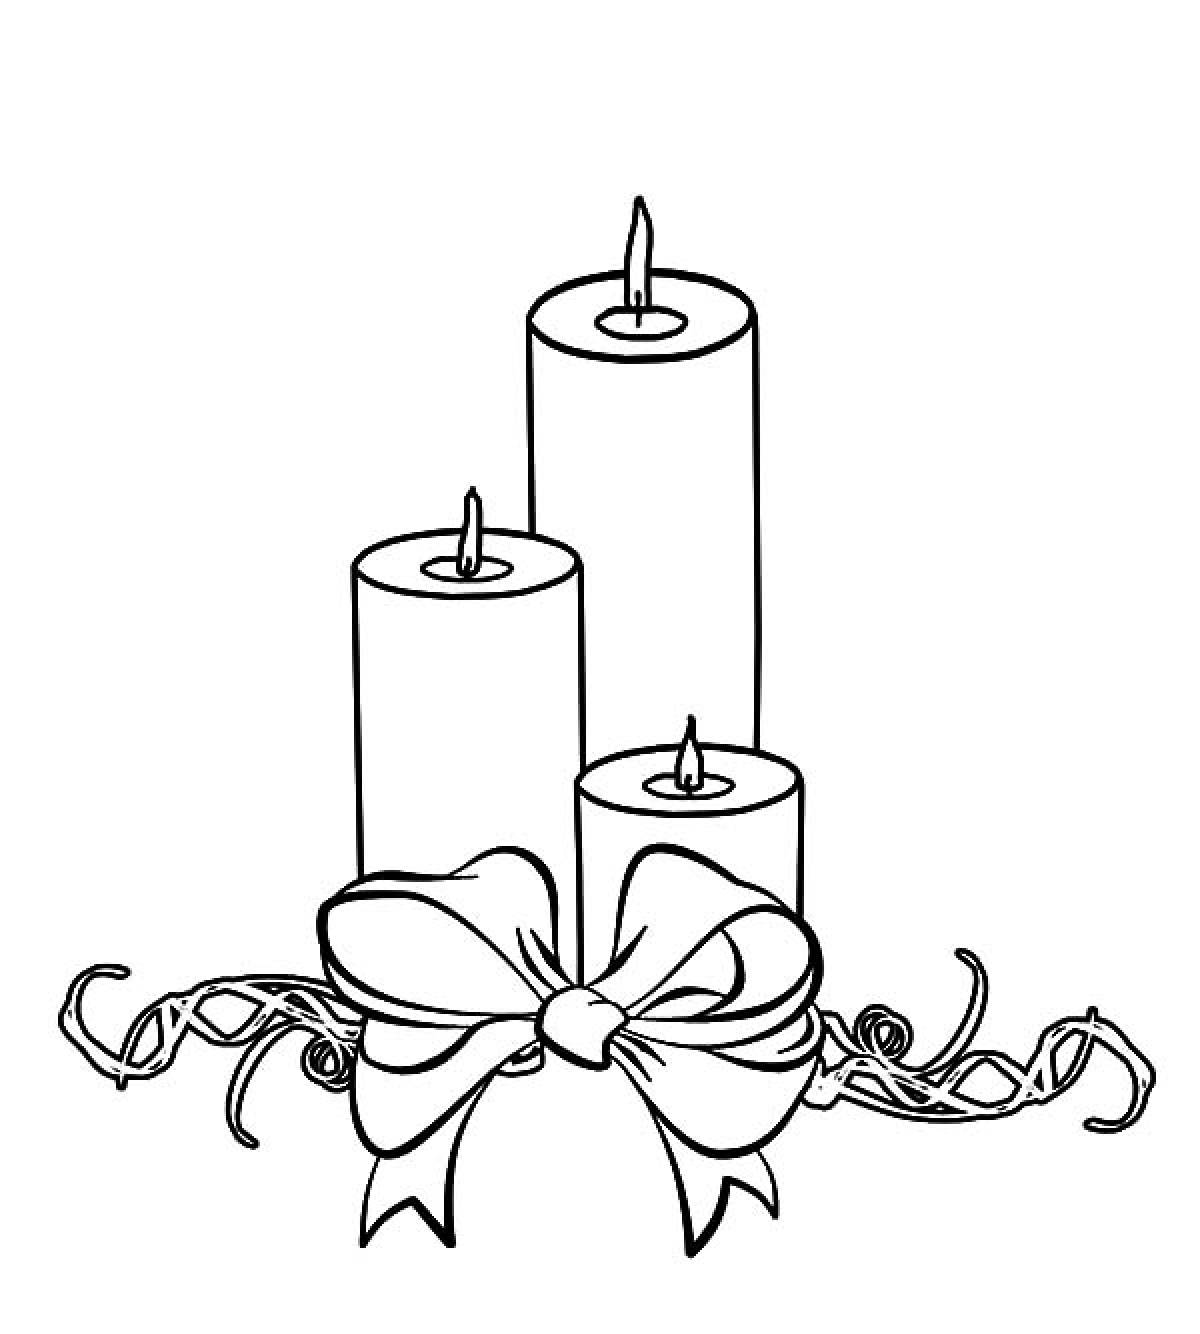 Candles with a bow